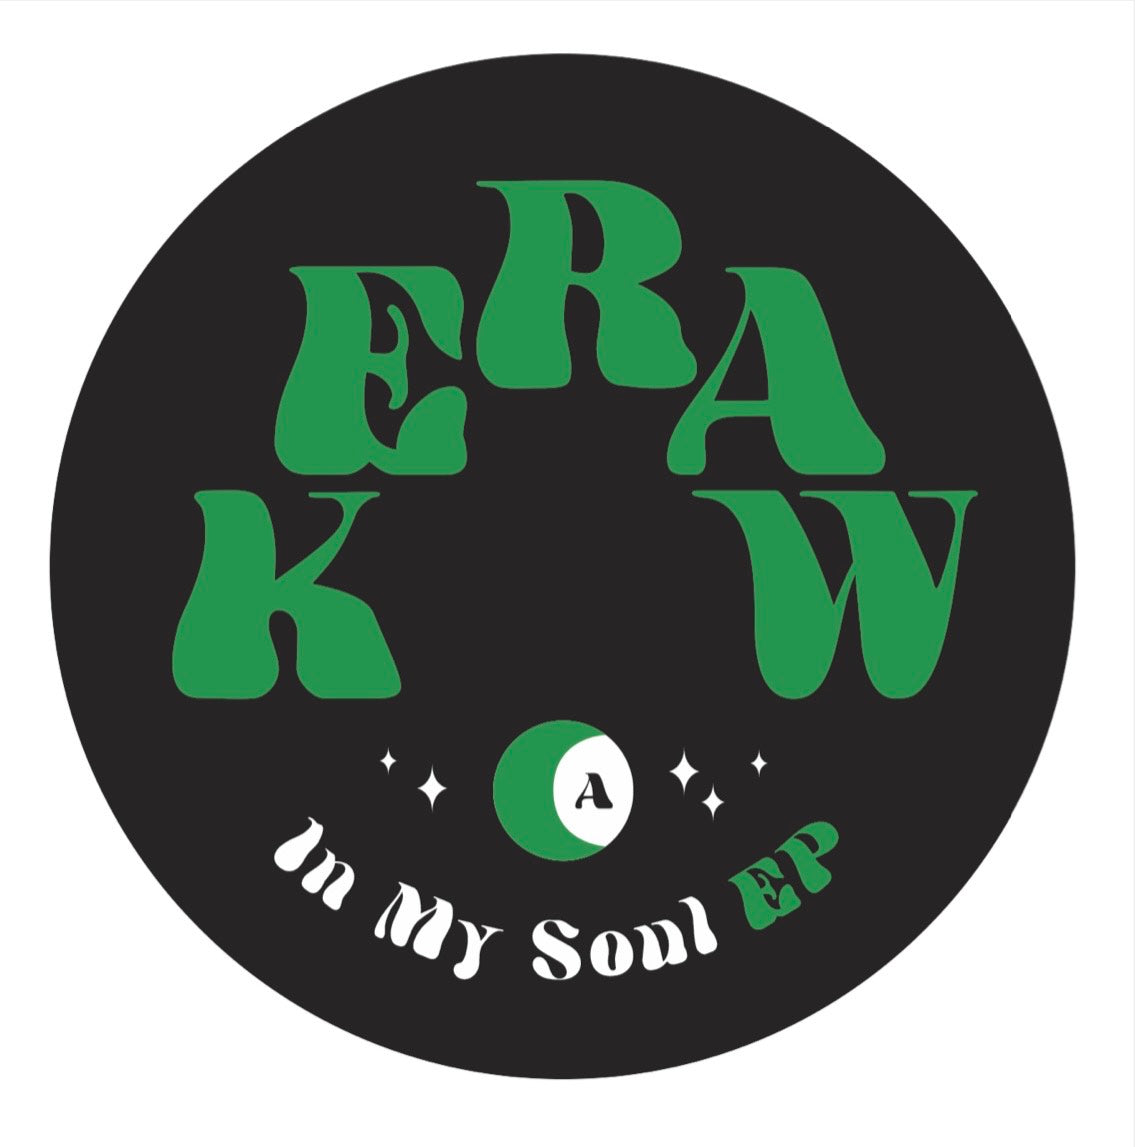 Keraw - In My Soul Ep (APRH Records) (M)